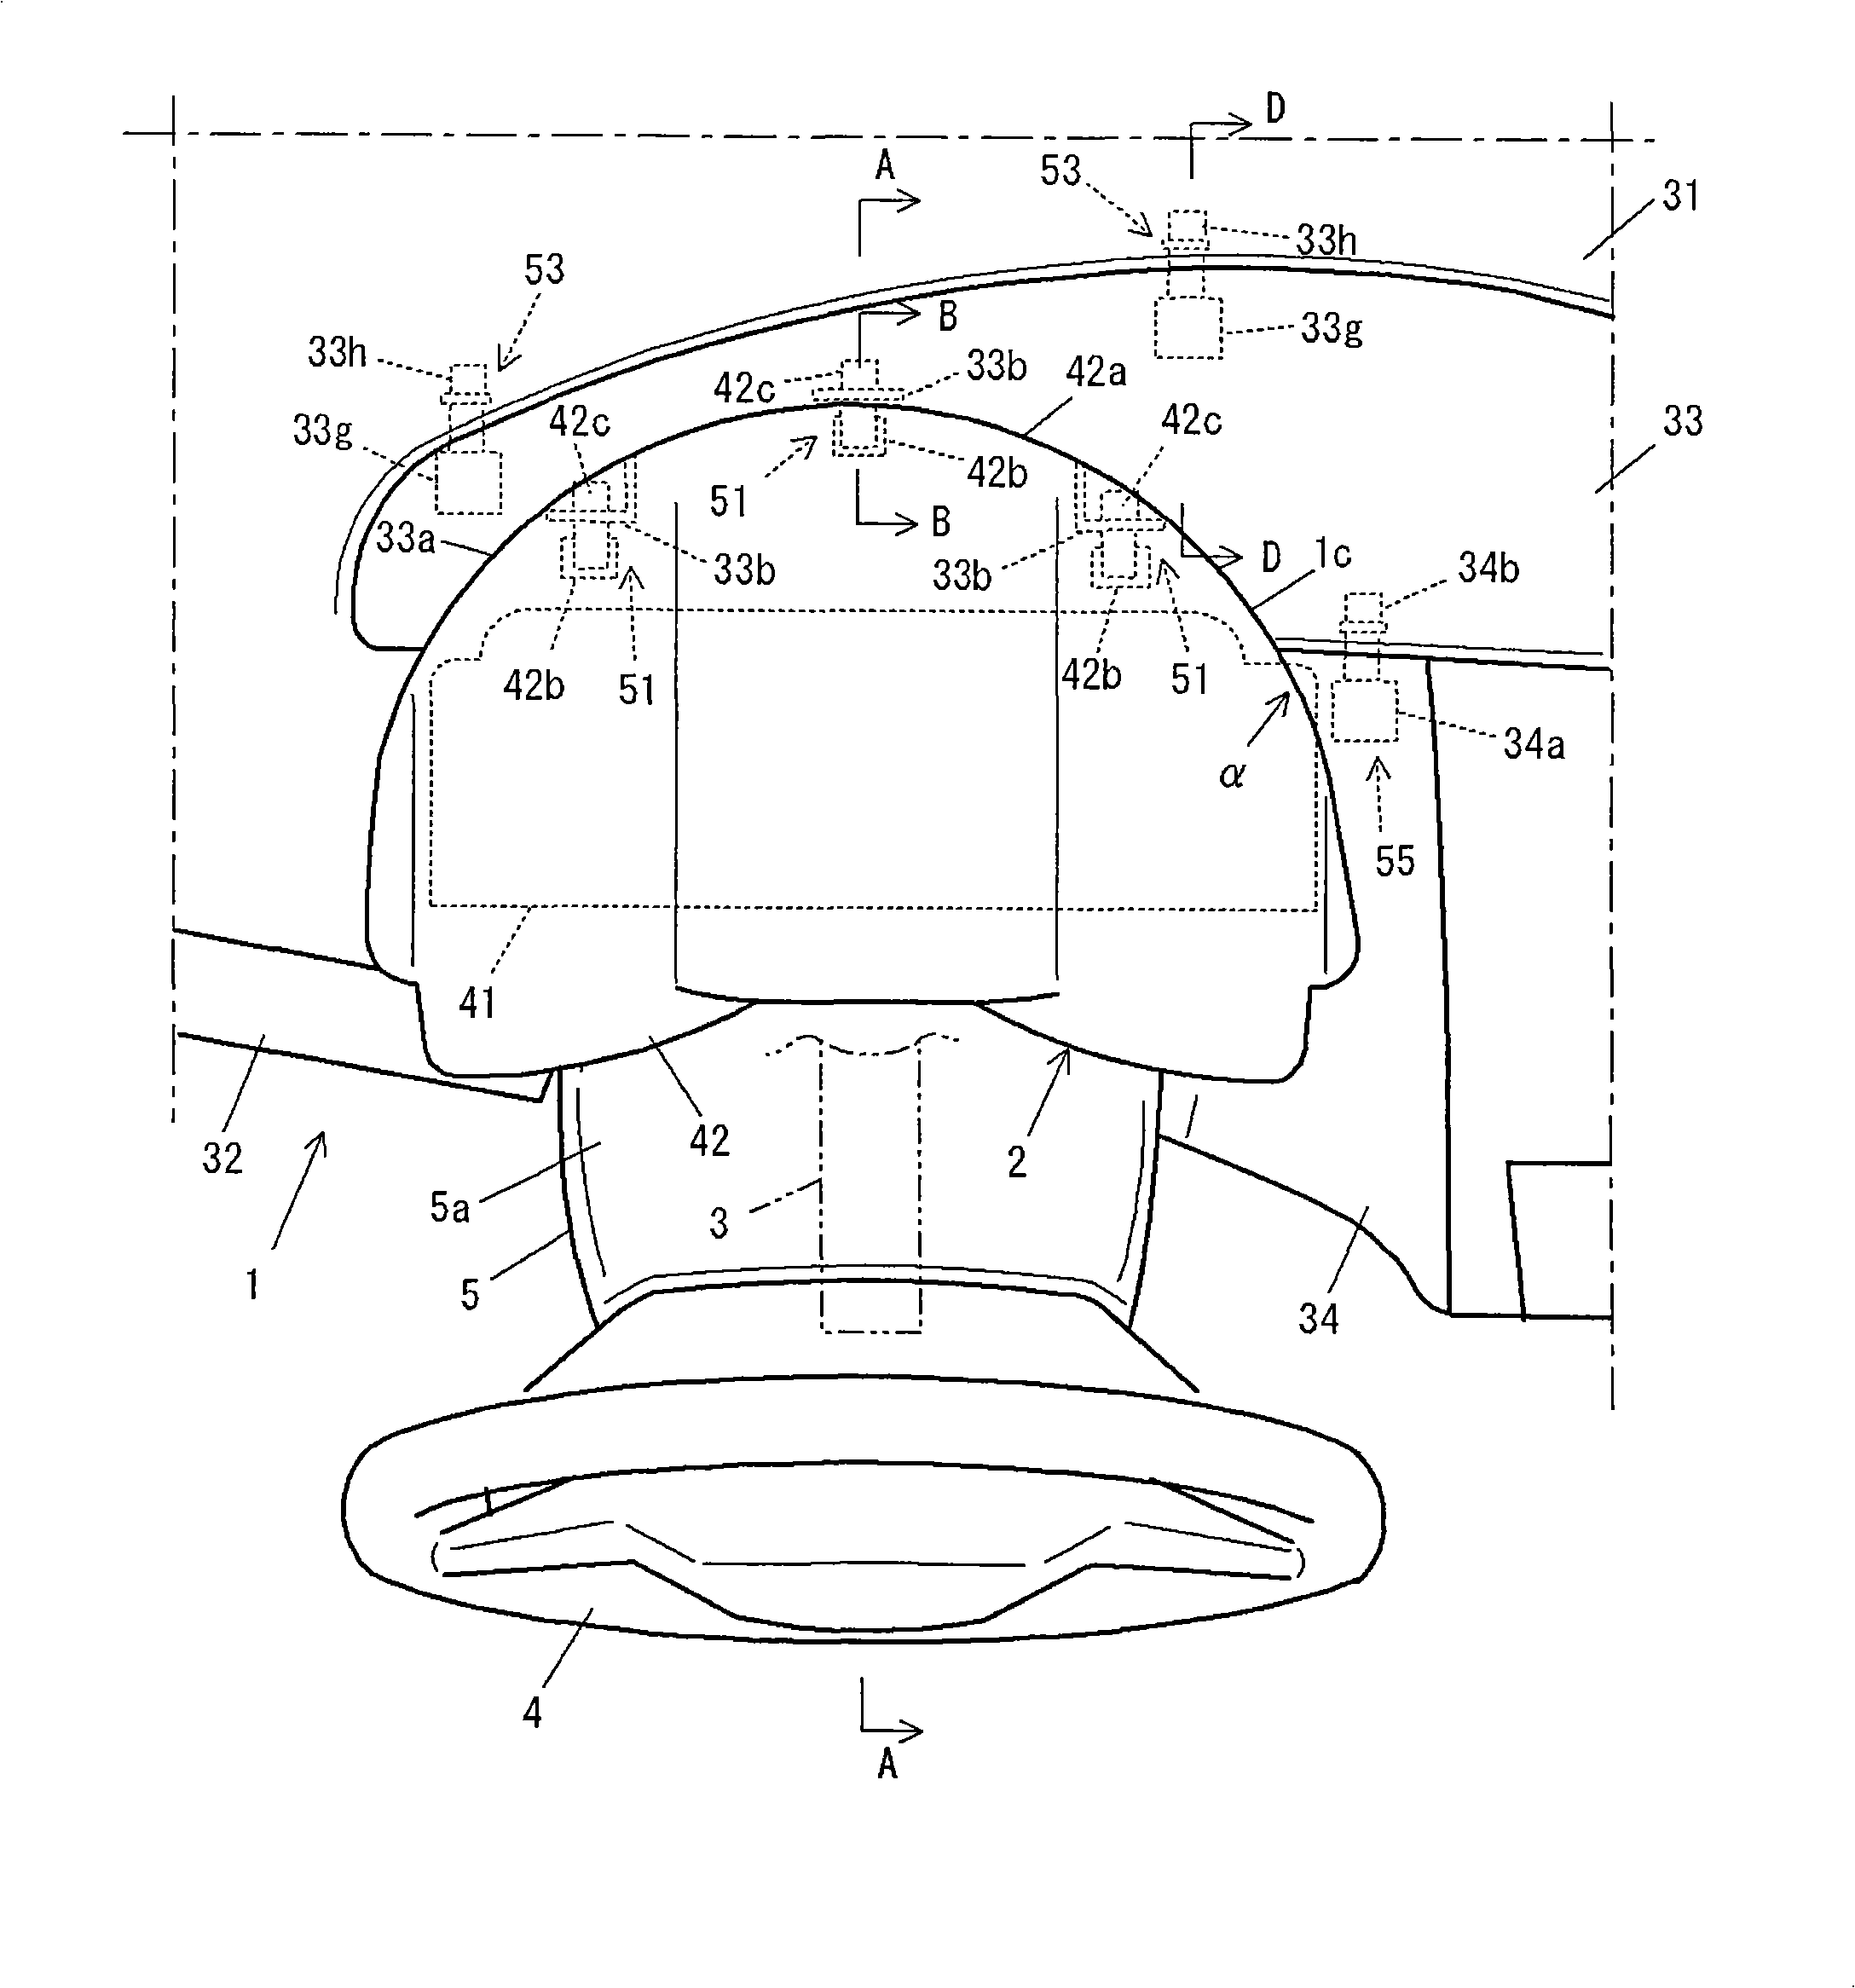 Structure of instrument panel area of vehicle